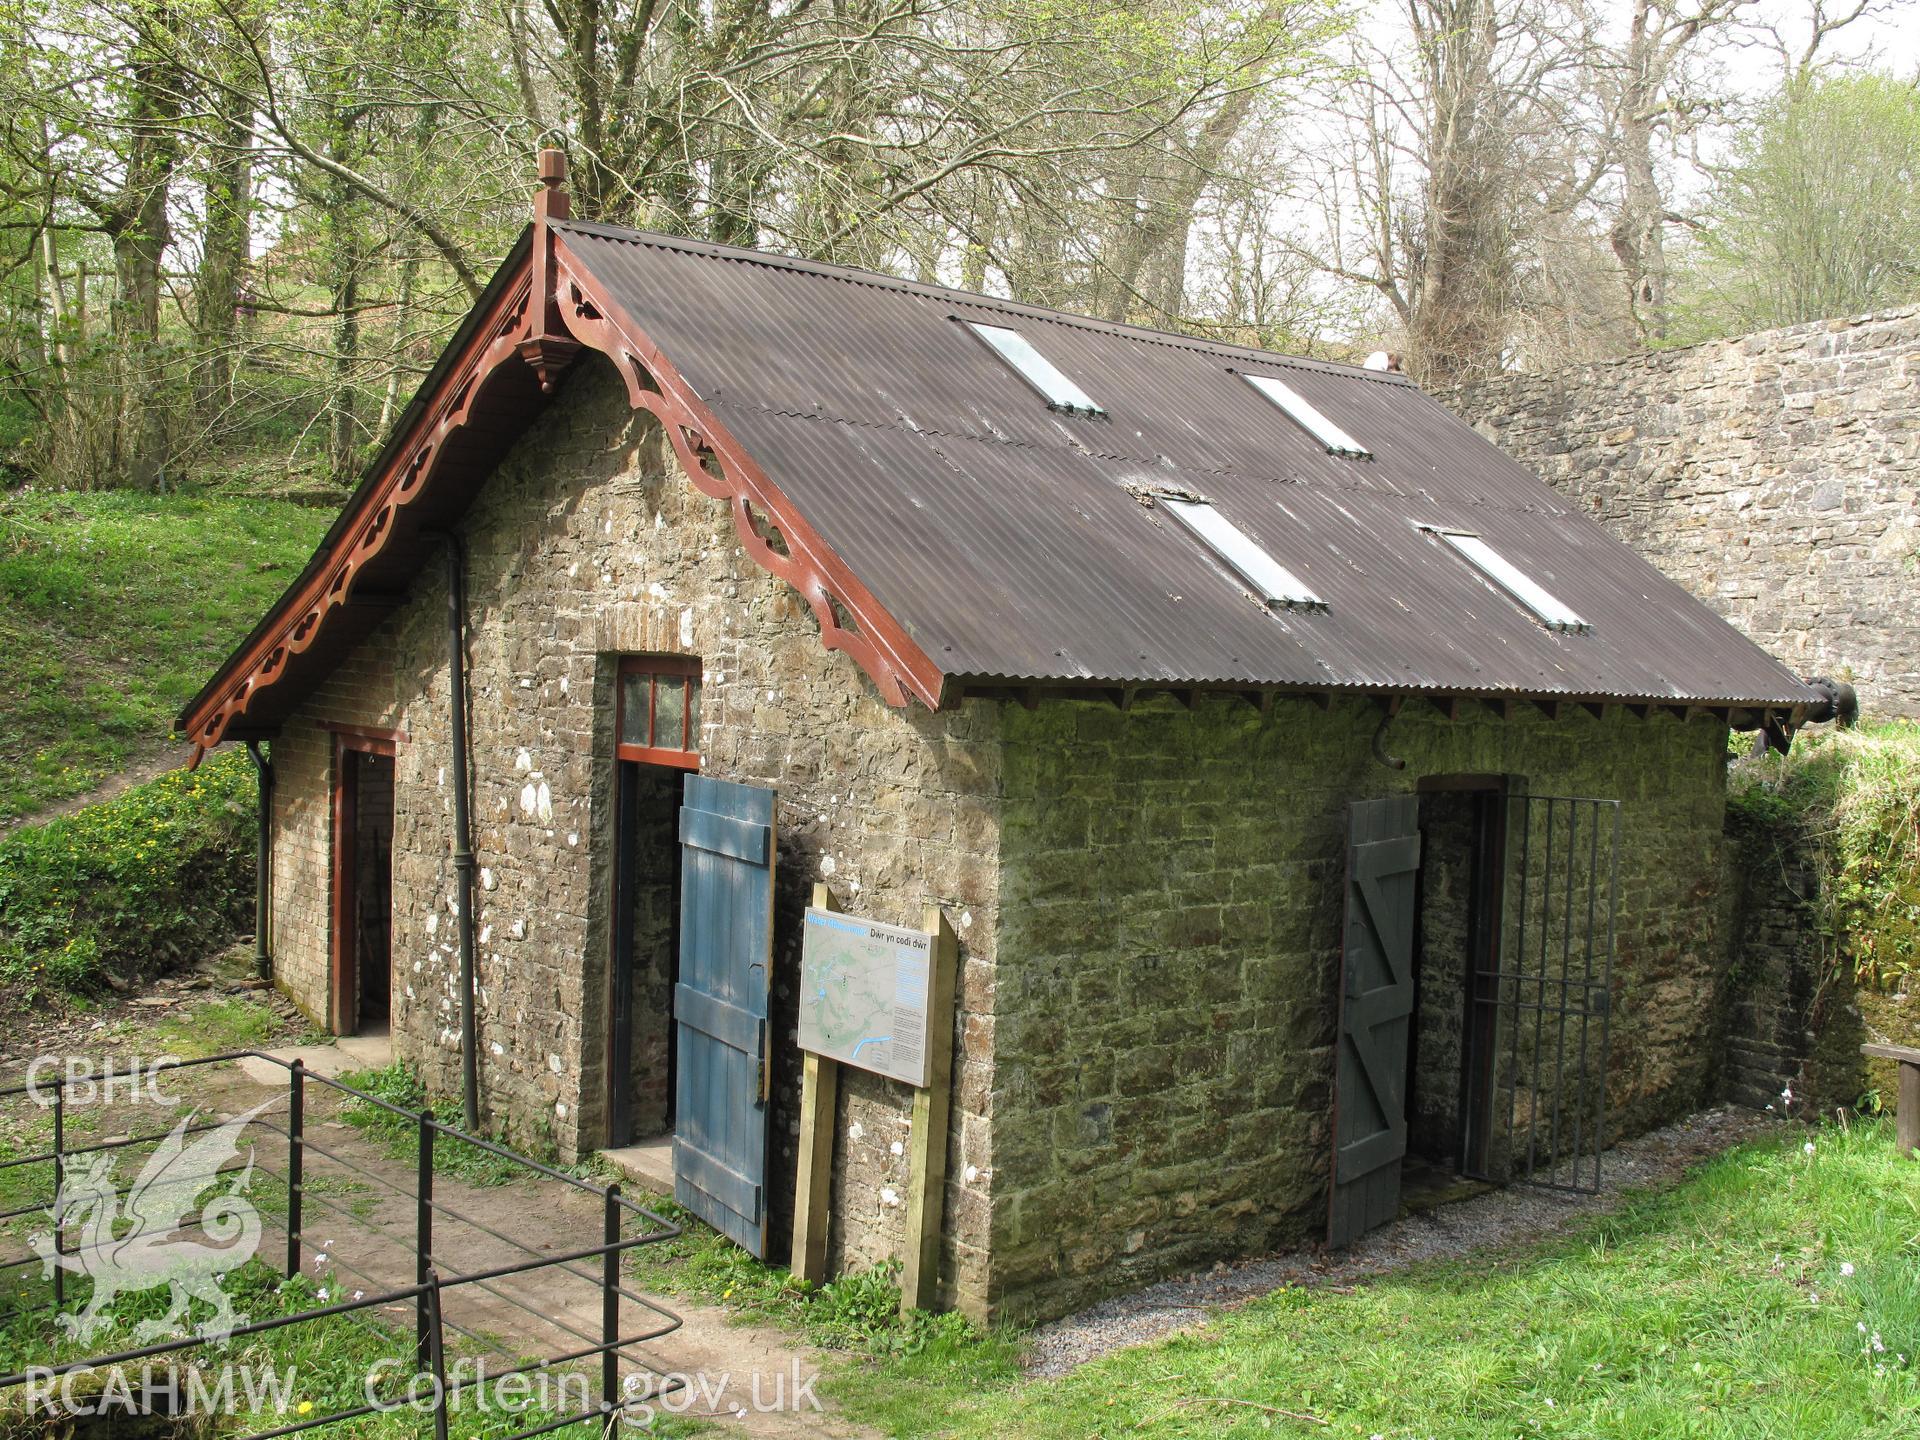 Dynefwr Park Pumping House, Llandeilo, from the south, taken by Brian Malaws on 24 April 2010.